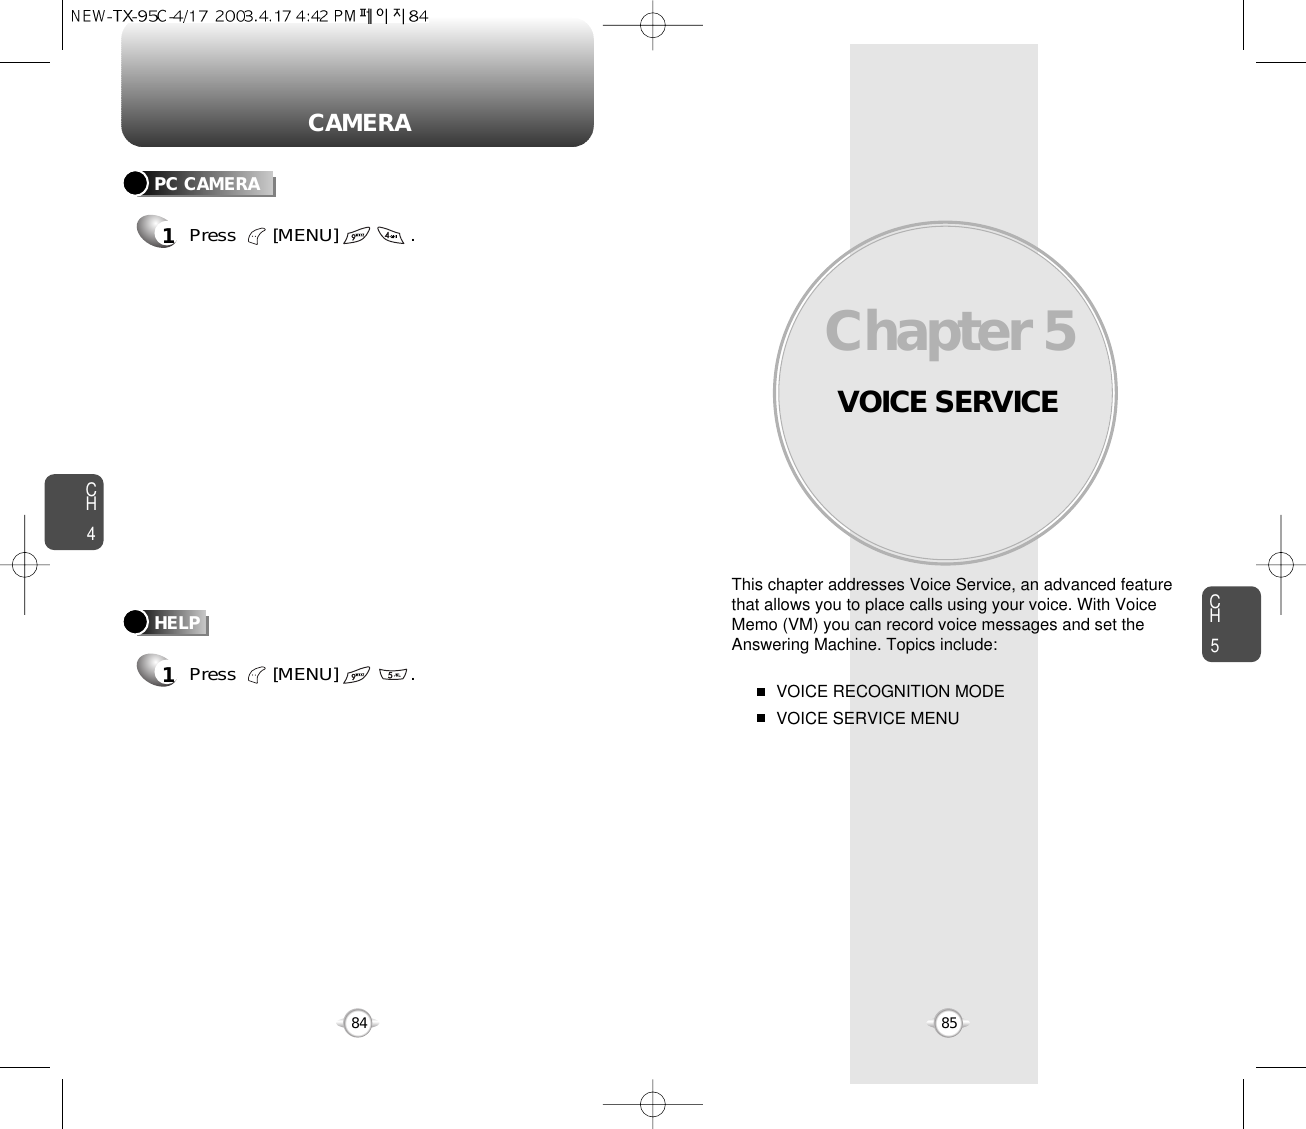 VOICE SERVICEThis chapter addresses Voice Service, an advanced featurethat allows you to place calls using your voice. With VoiceMemo (VM) you can record voice messages and set theAnswering Machine. Topics include:VOICE RECOGNITION MODEVOICE SERVICE MENU Chapter 58584CH585CAMERACH4PC CAMERA1Press       [MENU]              .HELP1Press       [MENU]              .